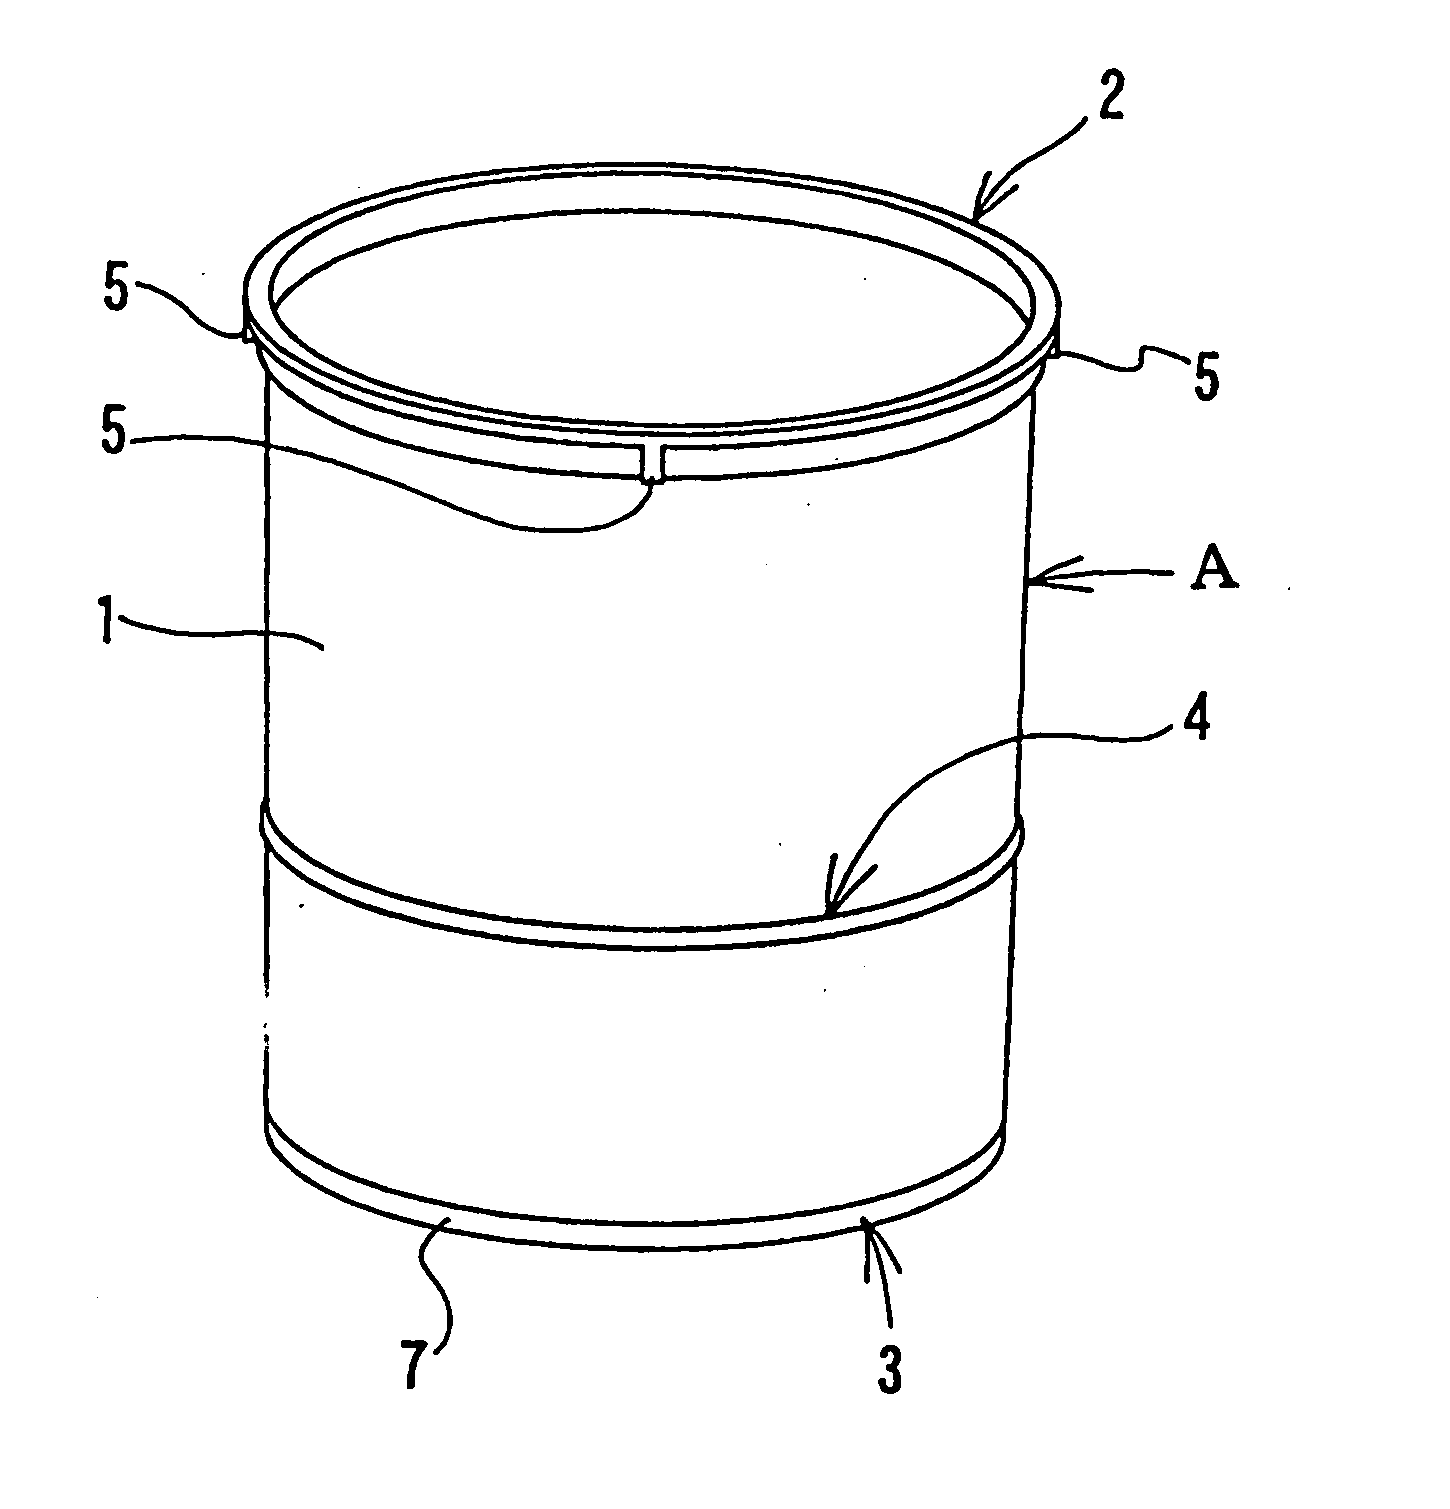 Holding container, external container for kneading and transportation, and transporting the container and kneader